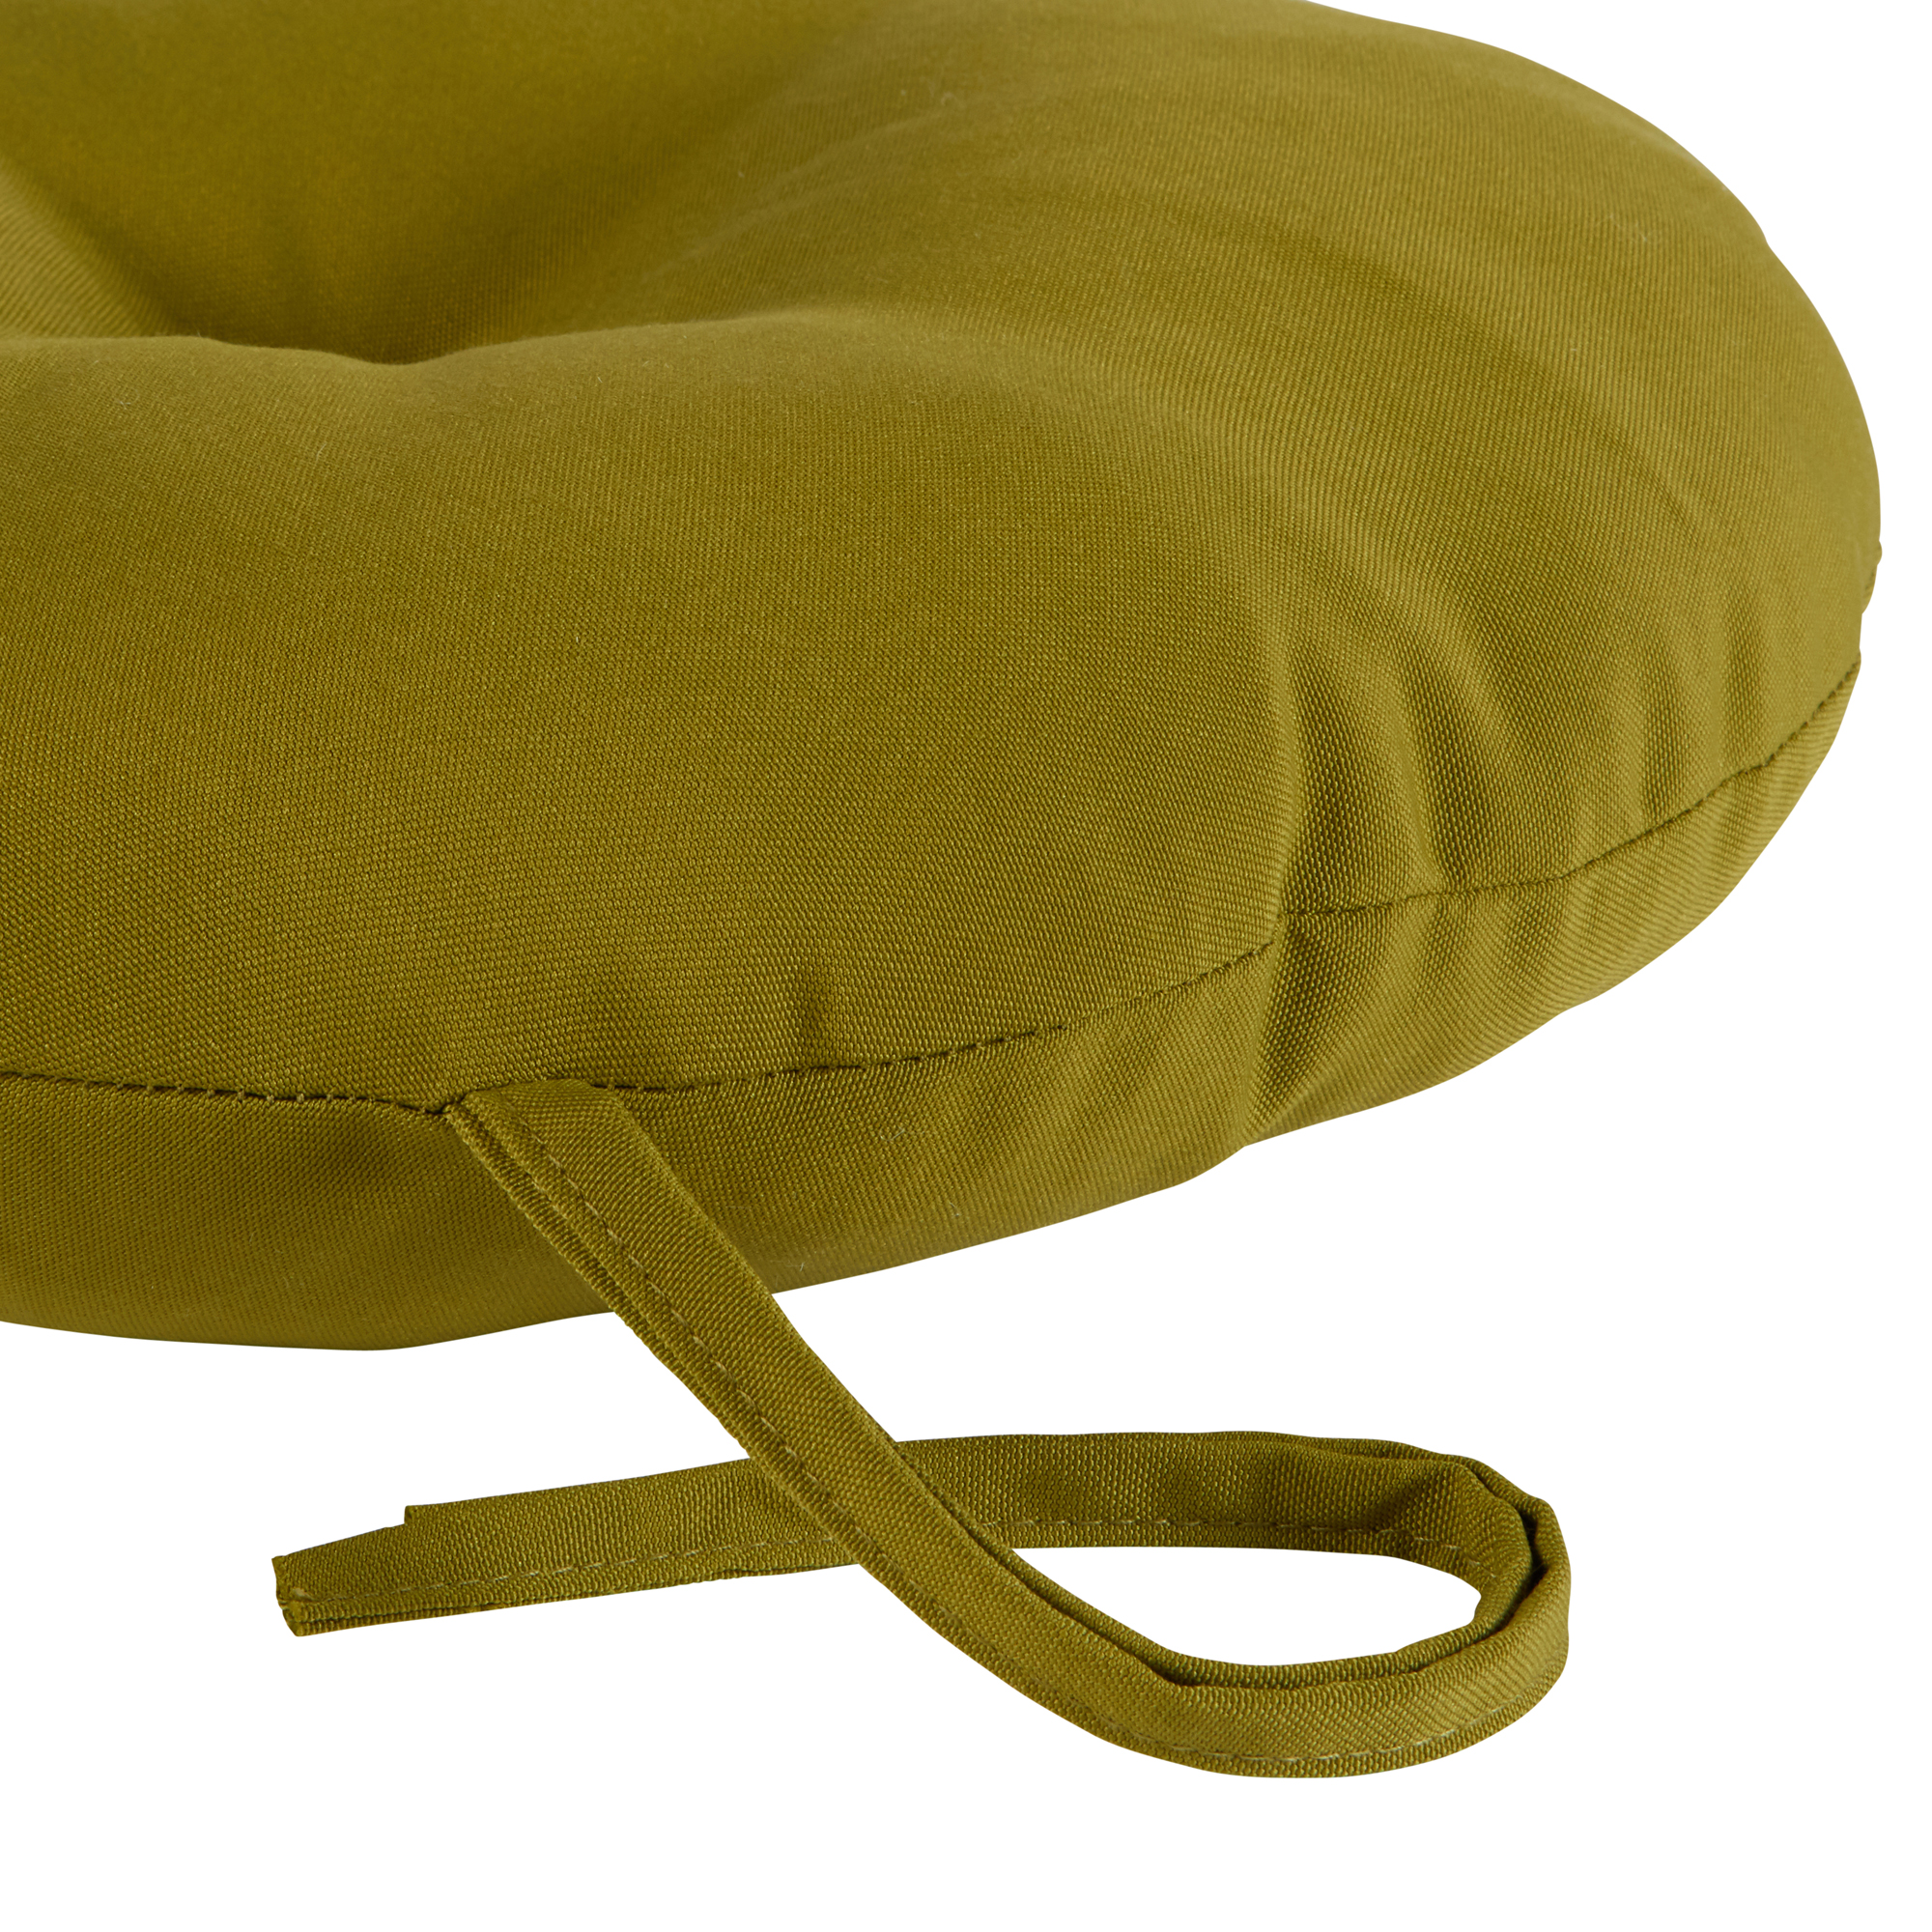 Greendale Home Fashions Kiwi Green 15 in. Round Outdoor Reversible Bistro Seat Cushion (Set of 2) - image 3 of 6